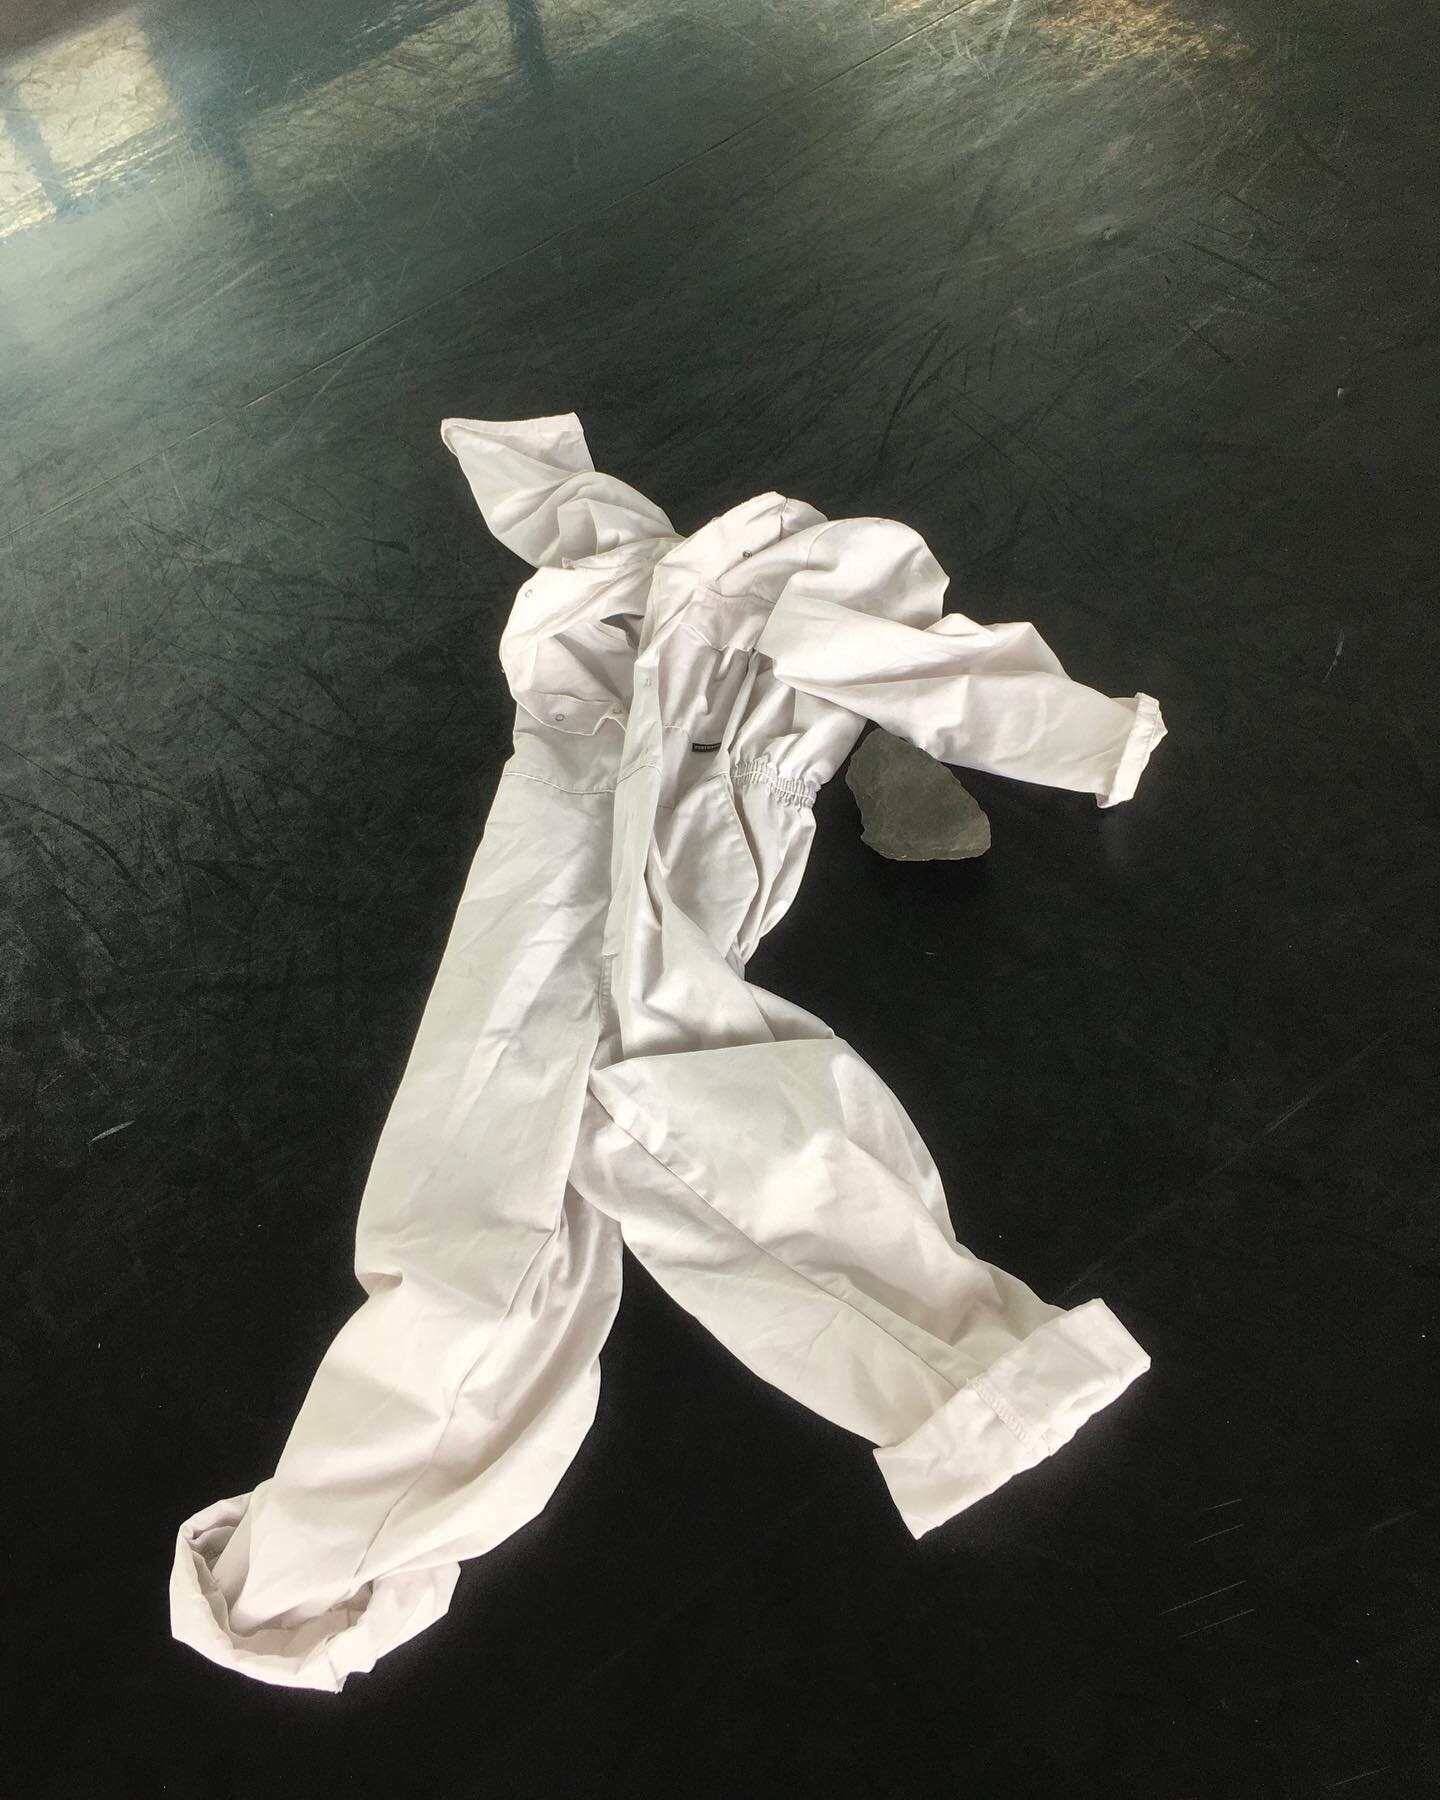 My coal, my white boiler suit and I, we are back together.
Thank you @dancebase gathering rehearsal spaces together towards #edfringe2022 &lsquo;Burnt Out&rsquo; 23rd- 28th of August at Dance Base.